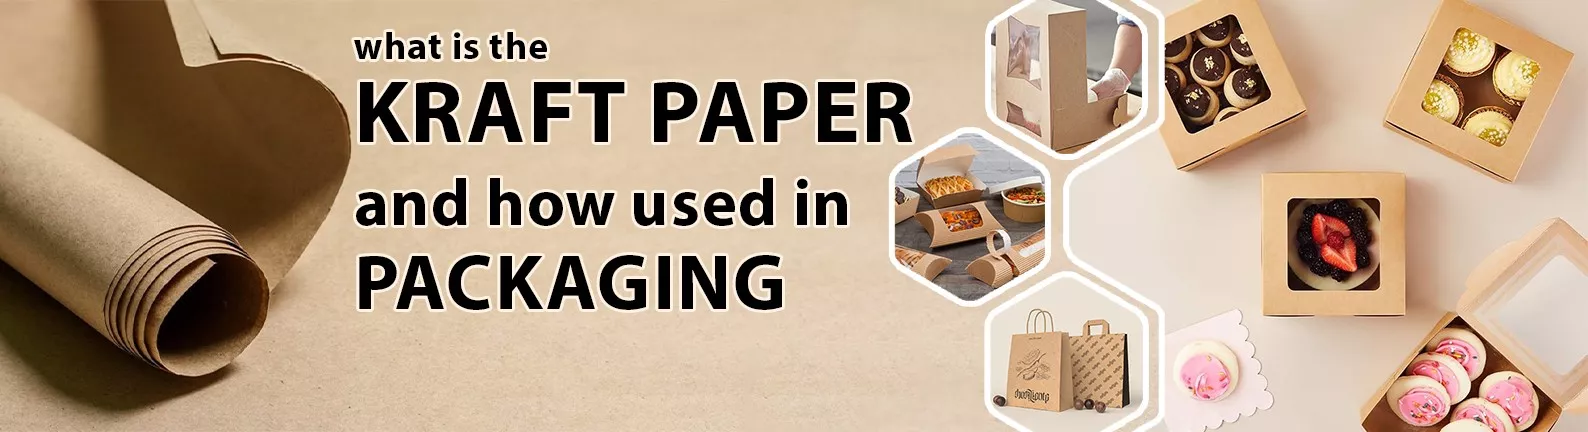 what-is-the-kraft-paper-and-how-used-in-packaging